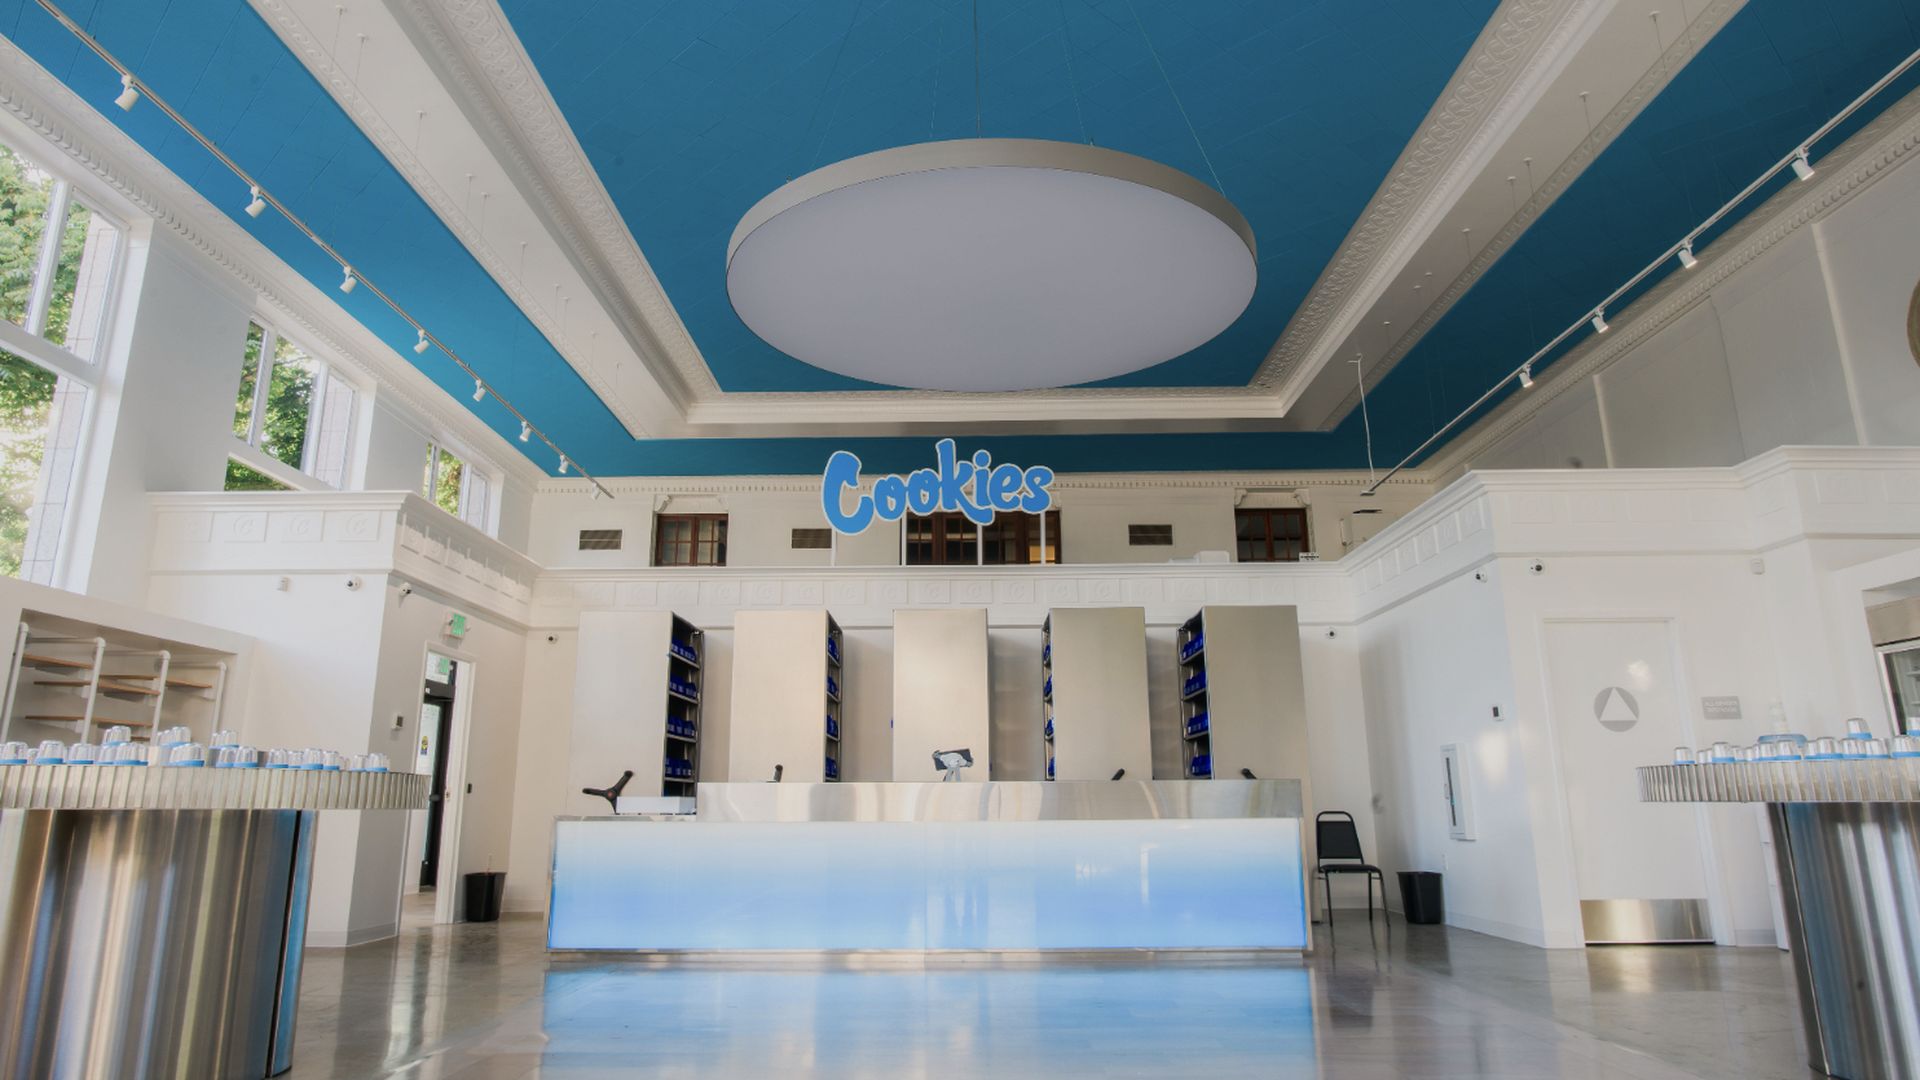 Interior of a retail store that's painted with a blue ceiling and white trim. The logo "Cookies" is centered in the rear of the room. 